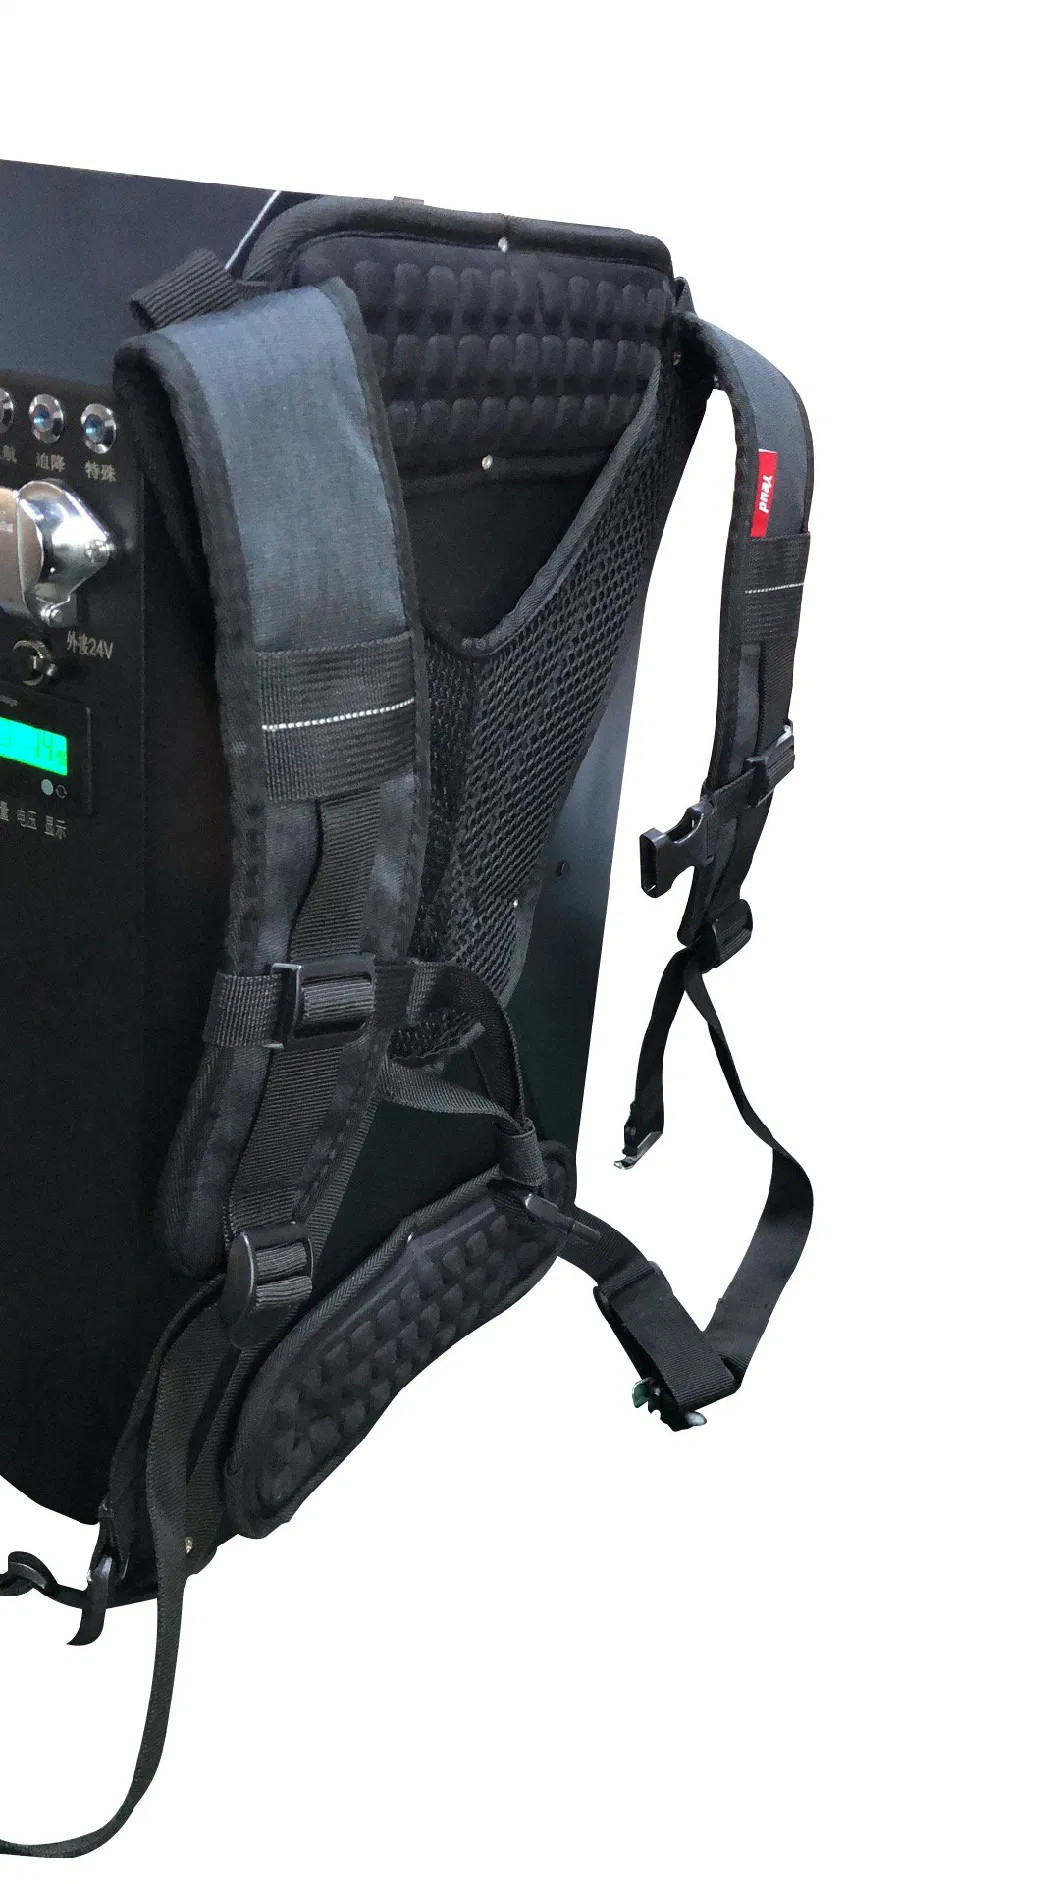 Backpack-Style Uav Drone Jammer GPS WiFi Anti Drone System